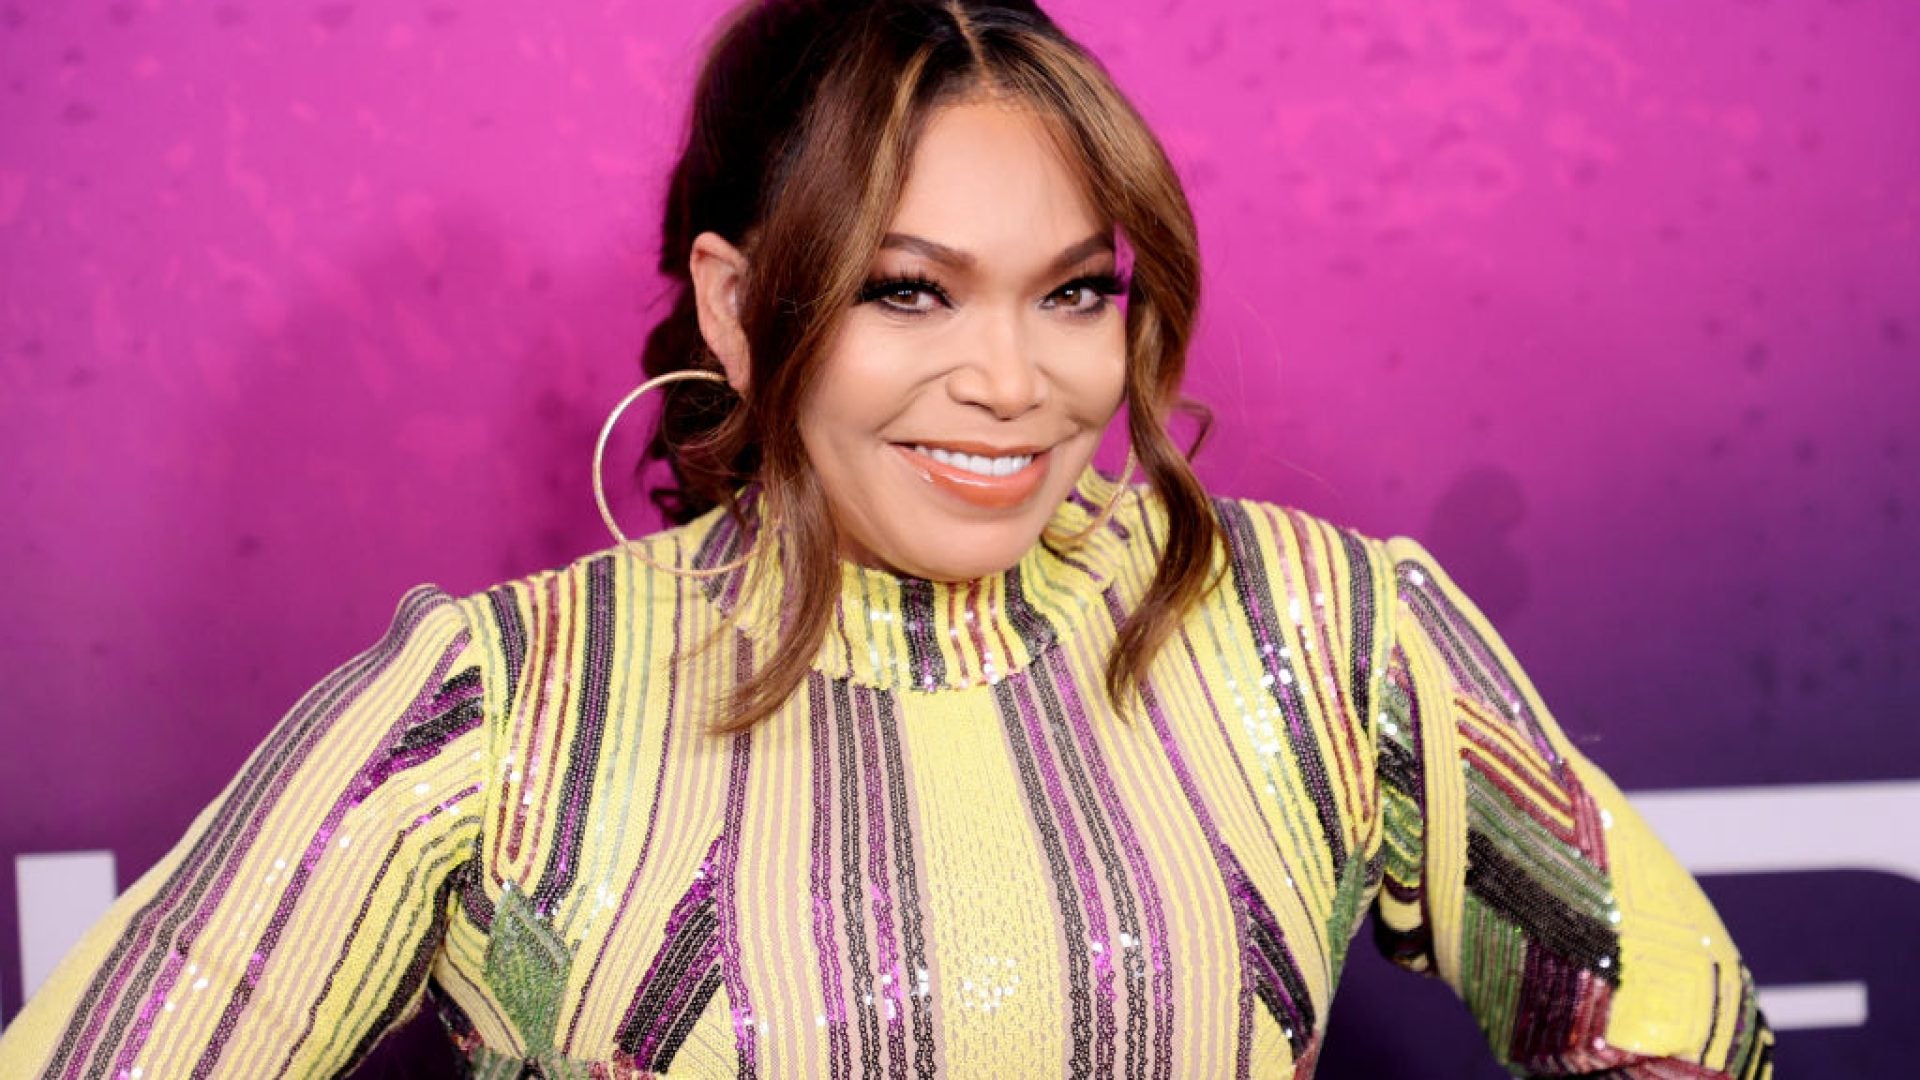 Two Years After Her Divorce, Tisha Campbell Officially Drops 'Martin' From Her Name